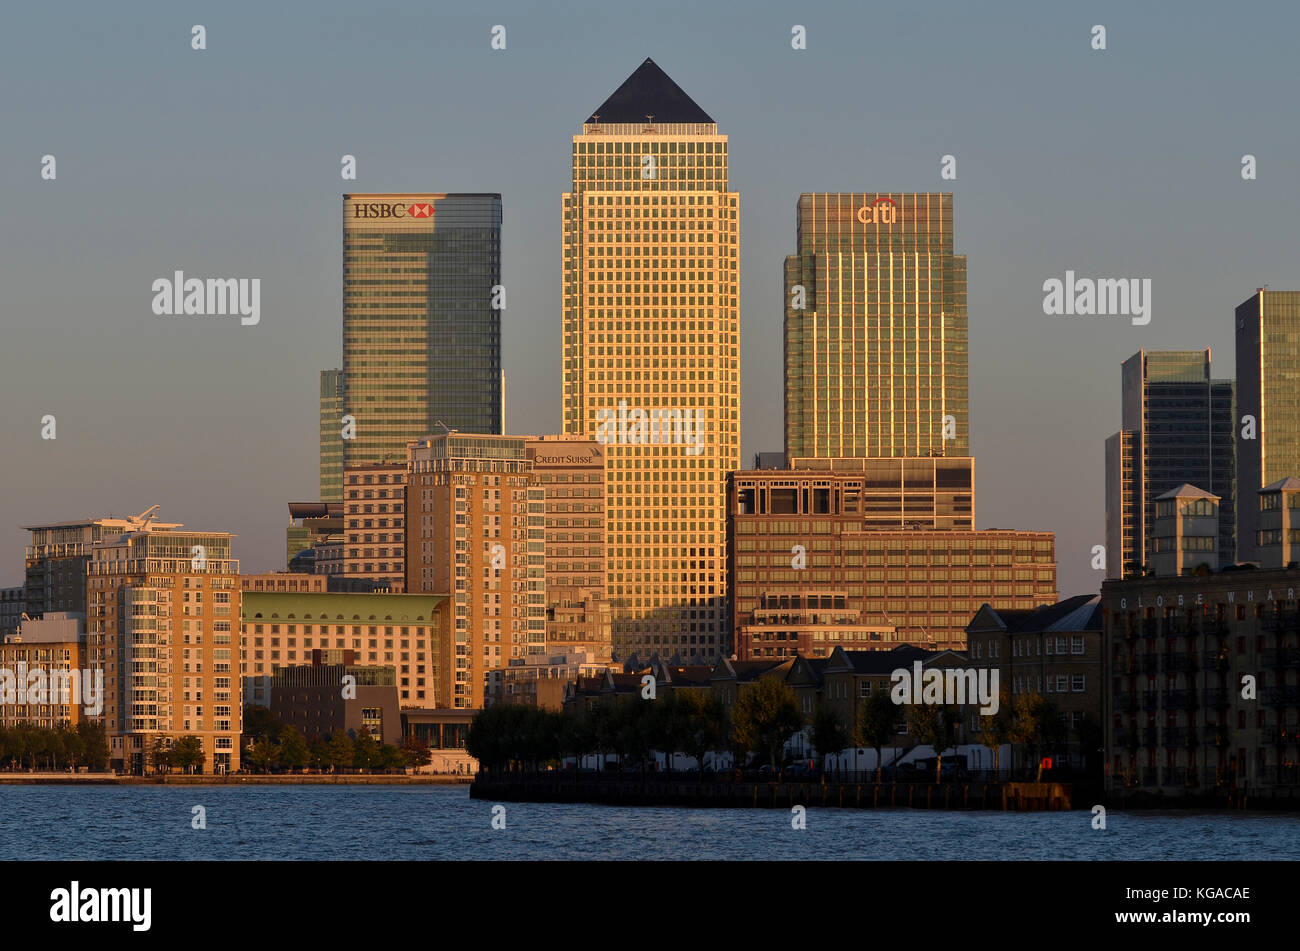 Canary Wharf, London, UK. HSBC, No.1 Canada Square, Citi and Credit Suisse office buildings all visible. Stock Photo